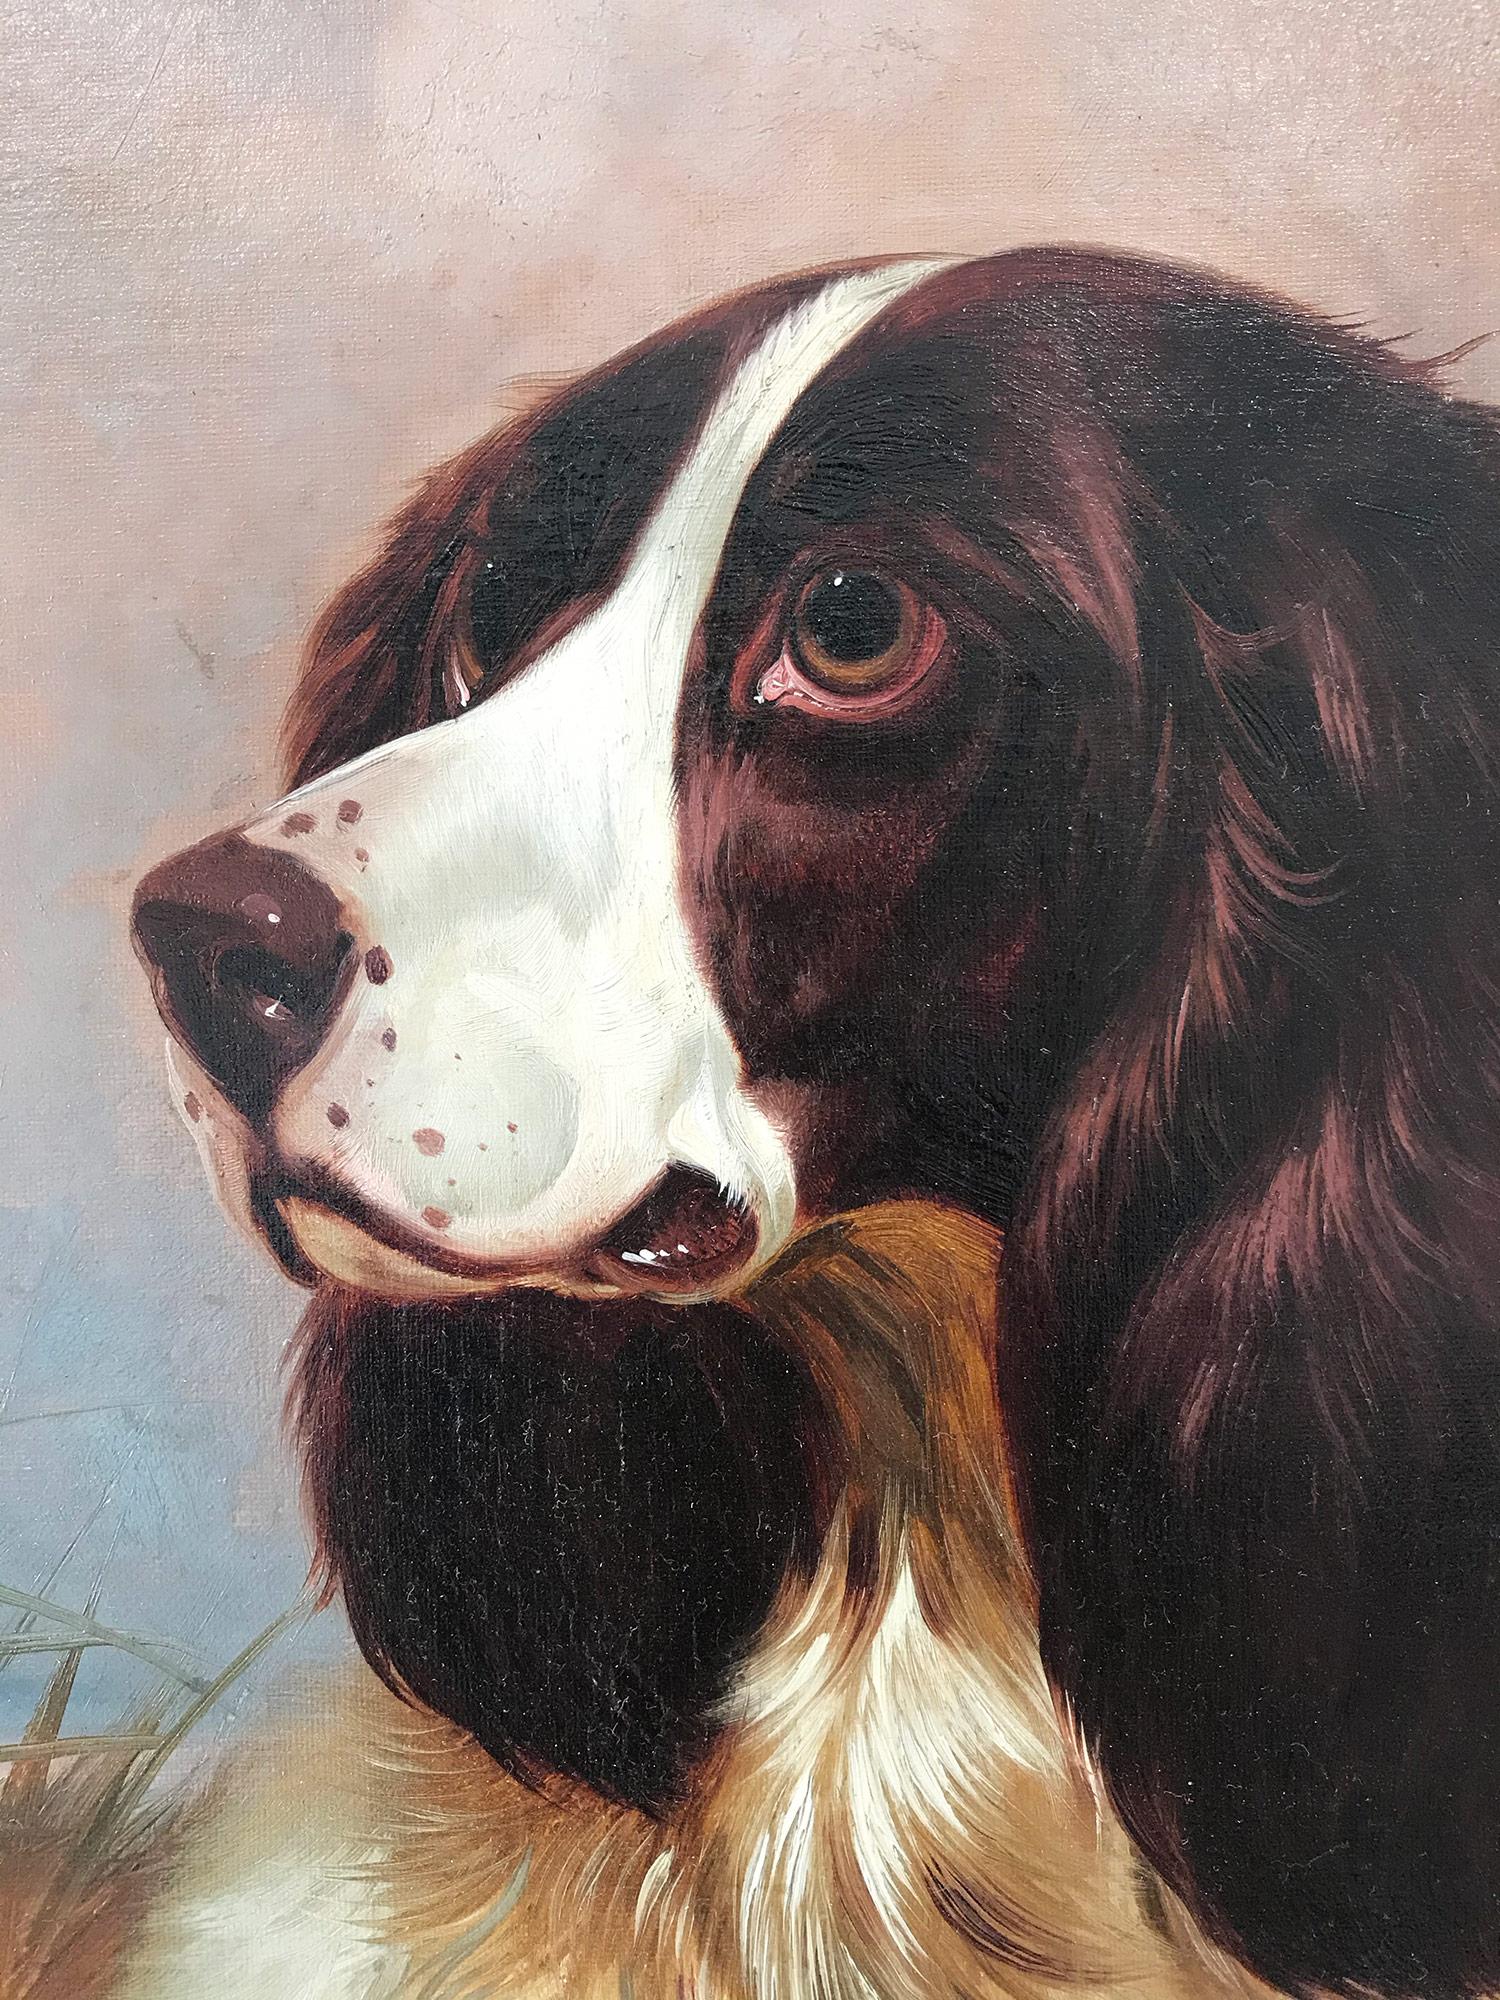 This work by Colin Graeme Roe is a pertinent example of his vividly alive works portraying a setter with a cloudy background in the brushes. The details are truly exquisite, as Colin was a Realist academic painter. This piece is an example from his